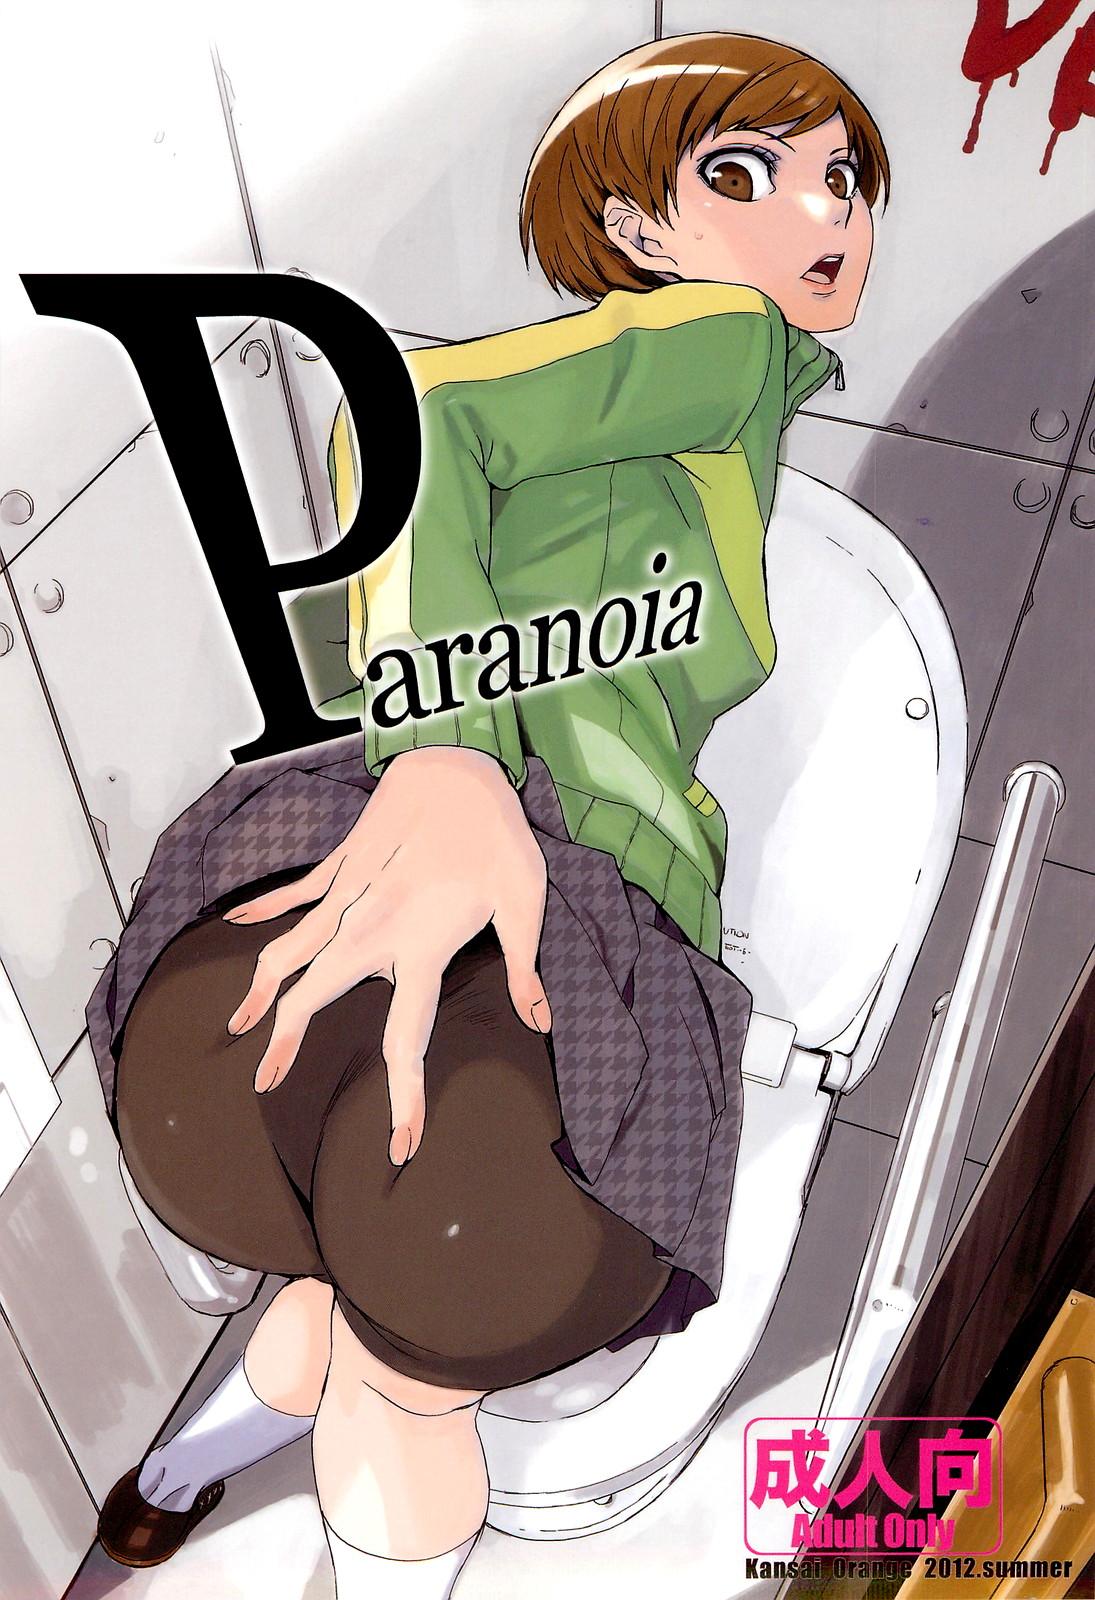 Hungarian Paranoia - Persona 4 Pierced - Picture 1